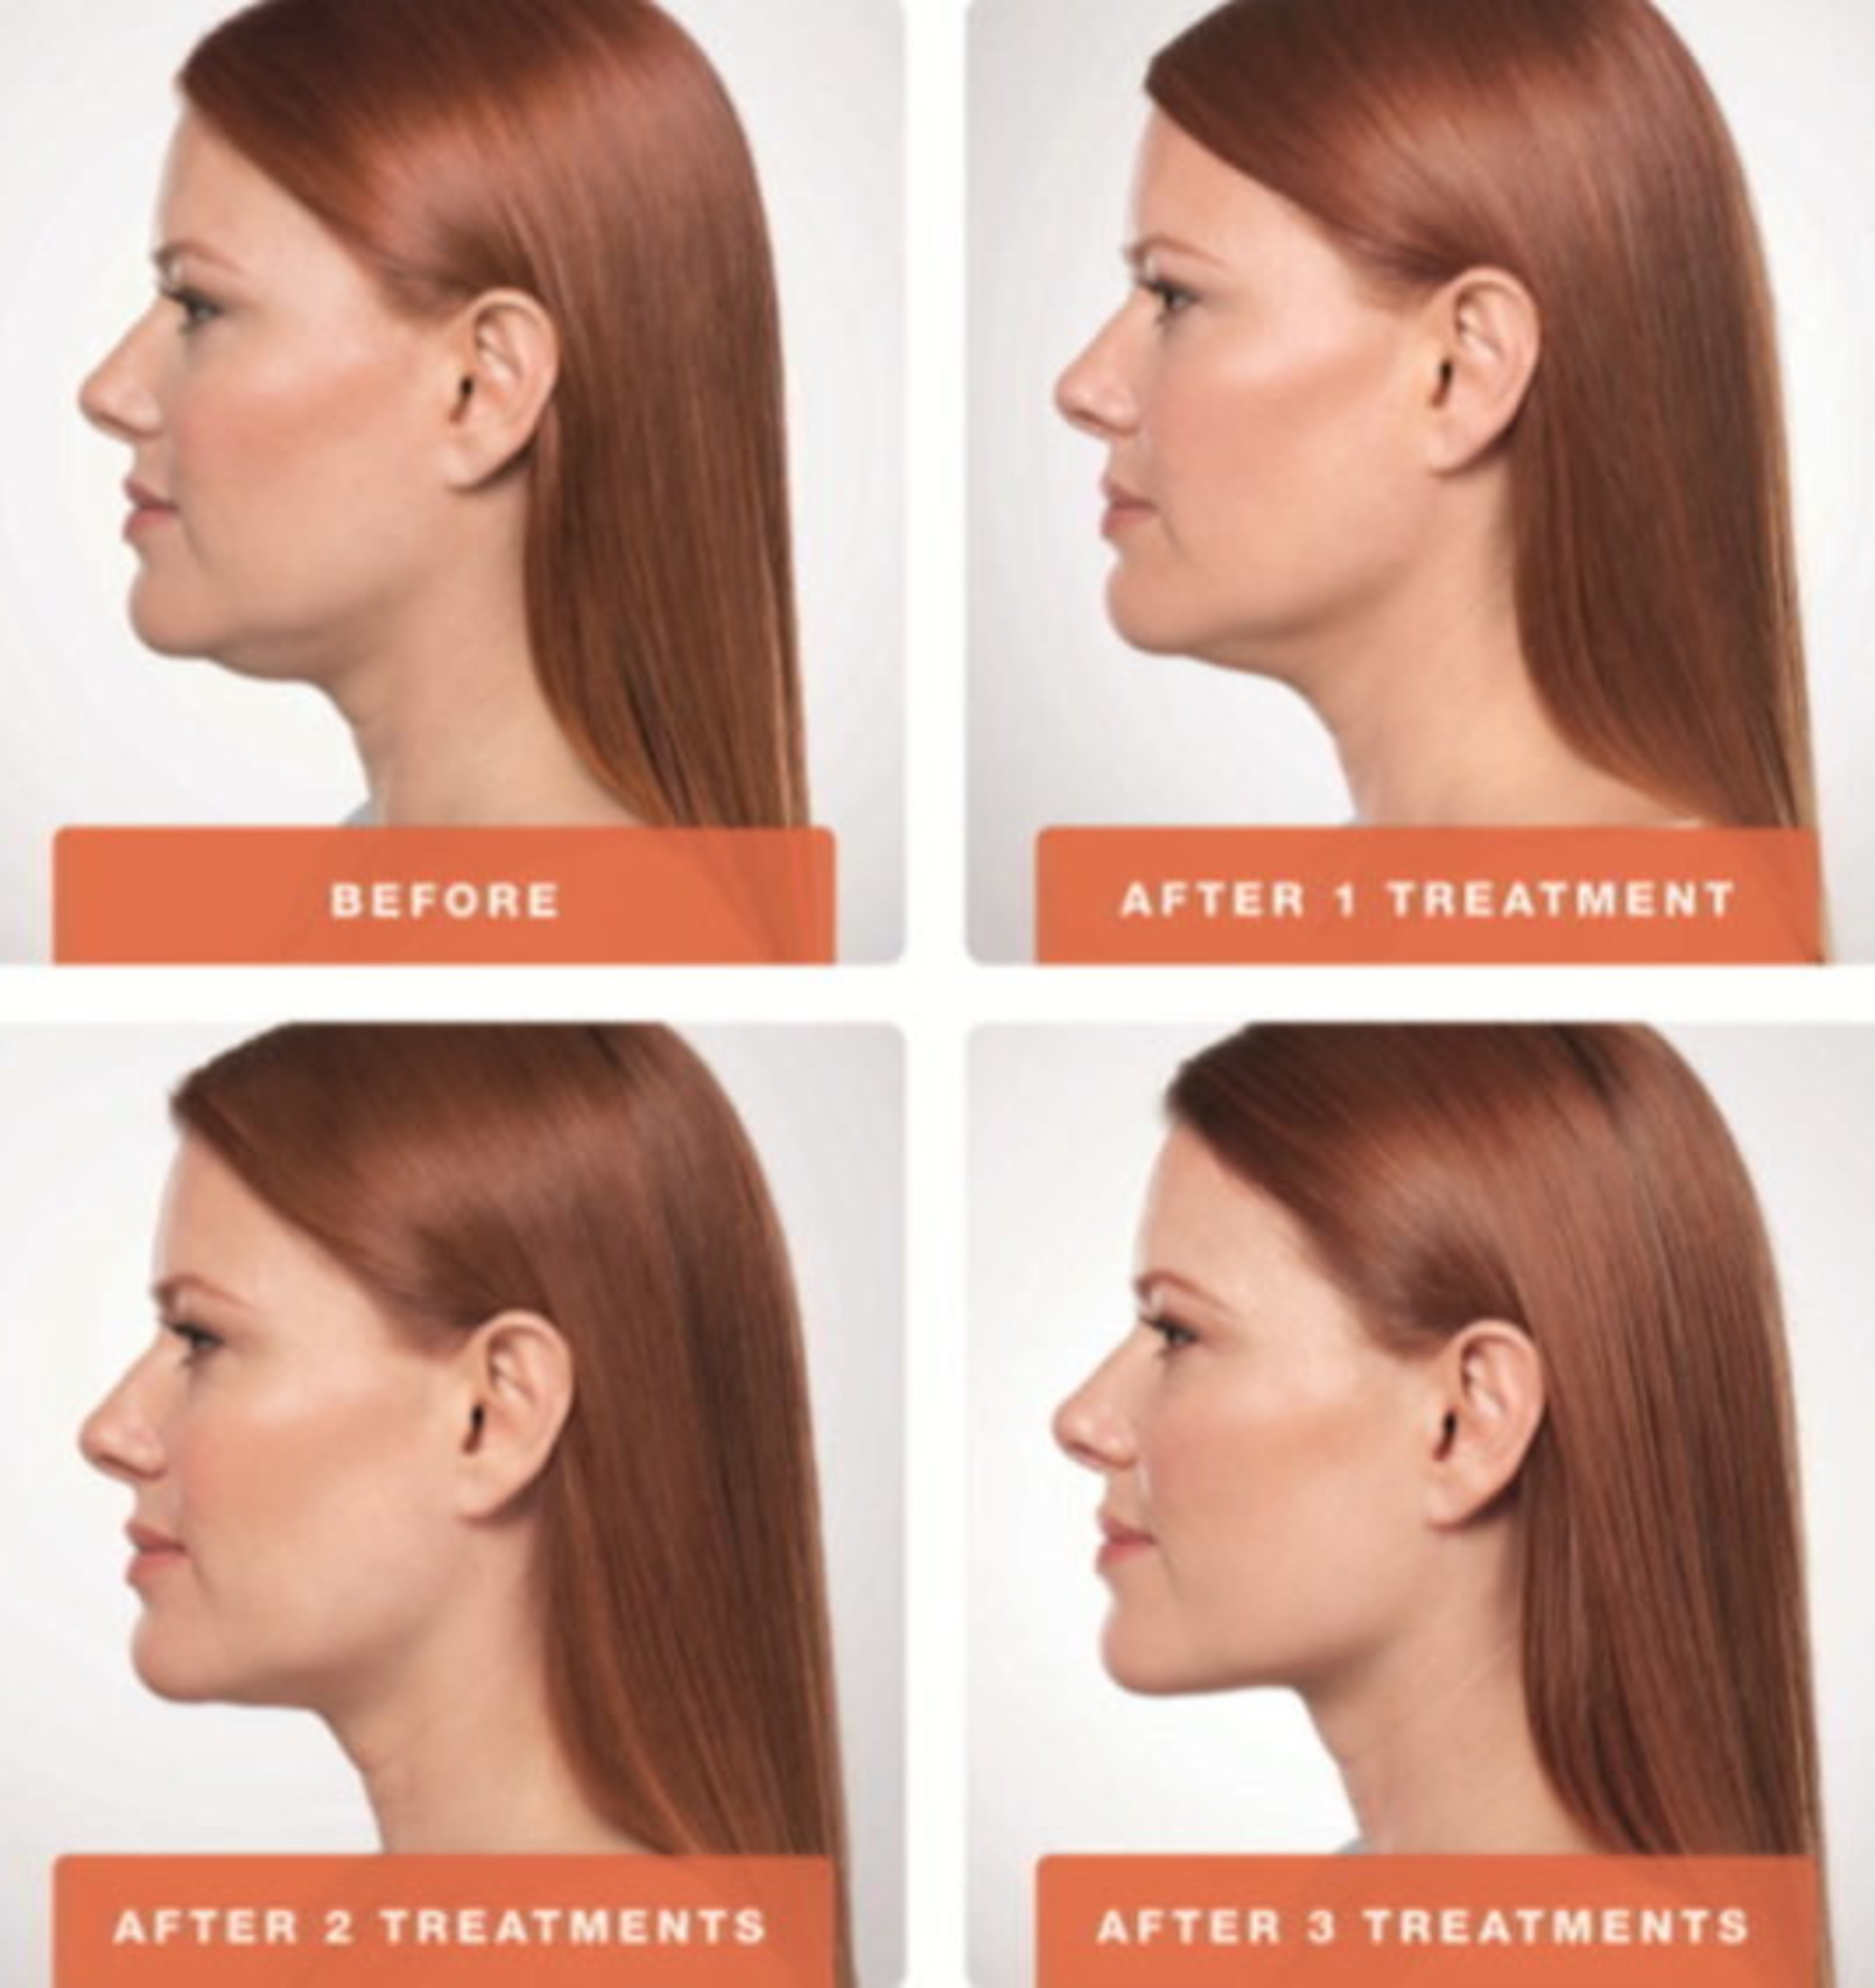 Kybella Treatment Before and After. The top picture is (2) treatments. The bottom is after (4) treatments.